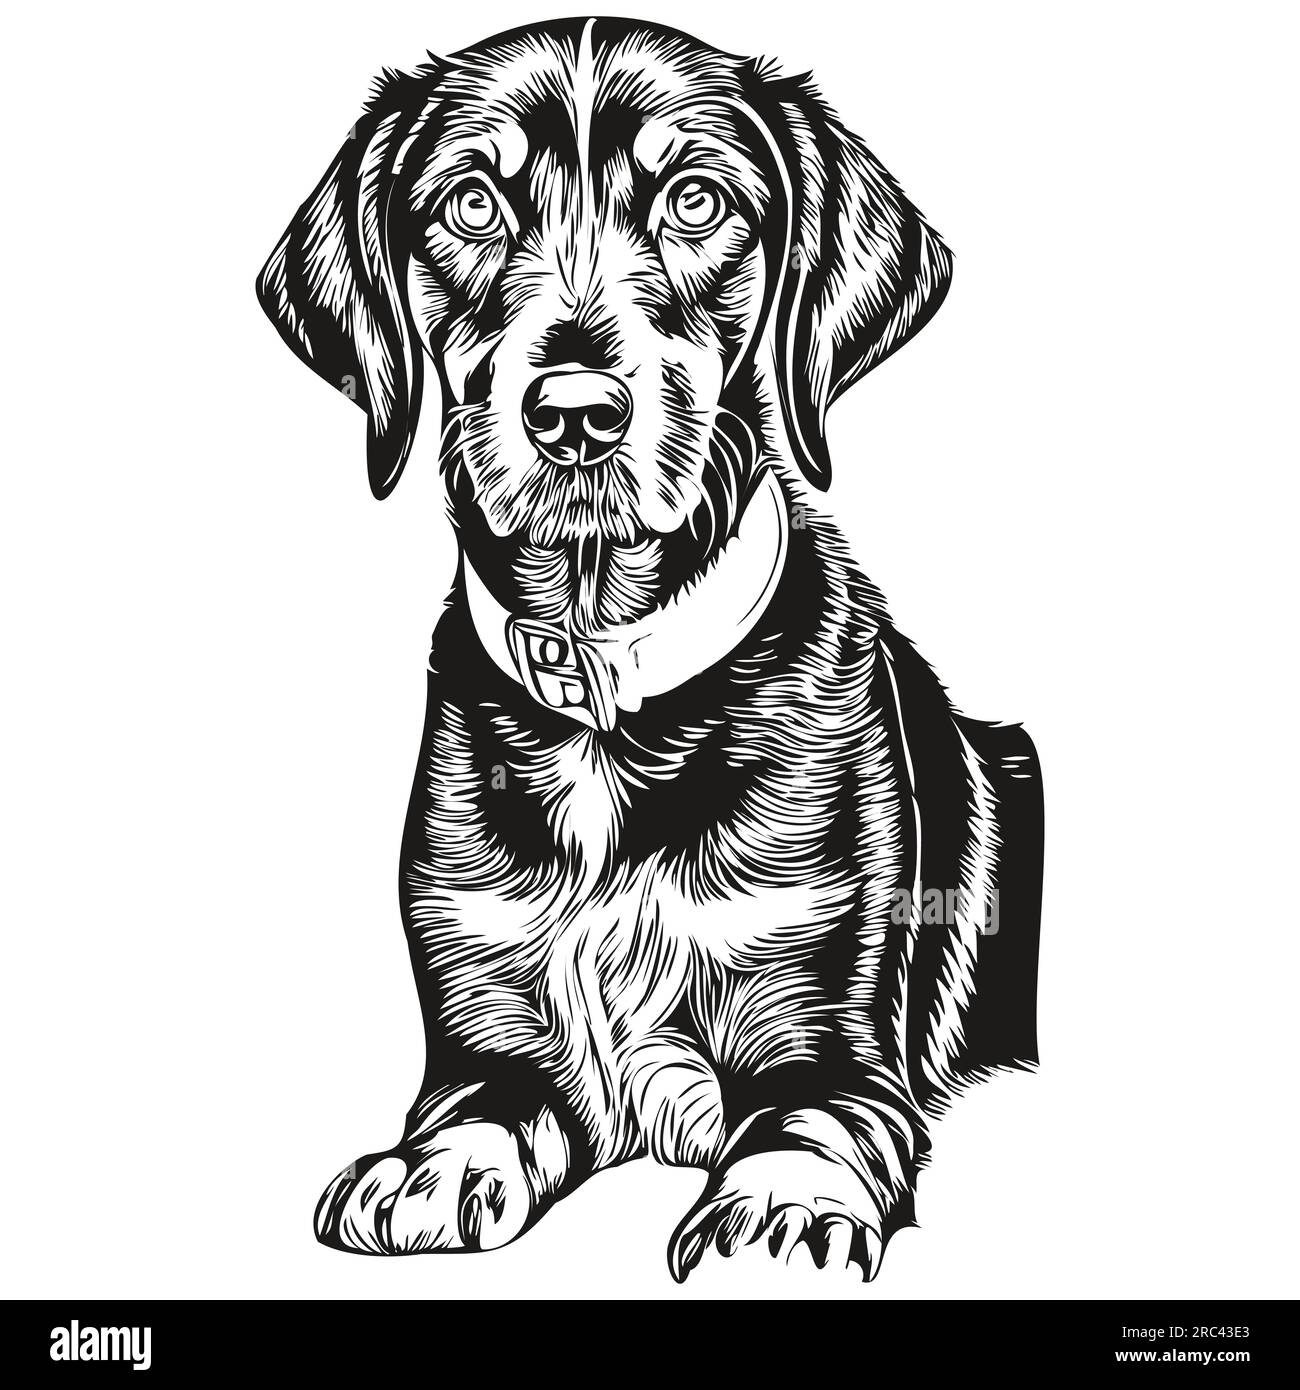 Black and Tan Coonhound dog realistic pet illustration, hand drawing face black and white vector Stock Vector